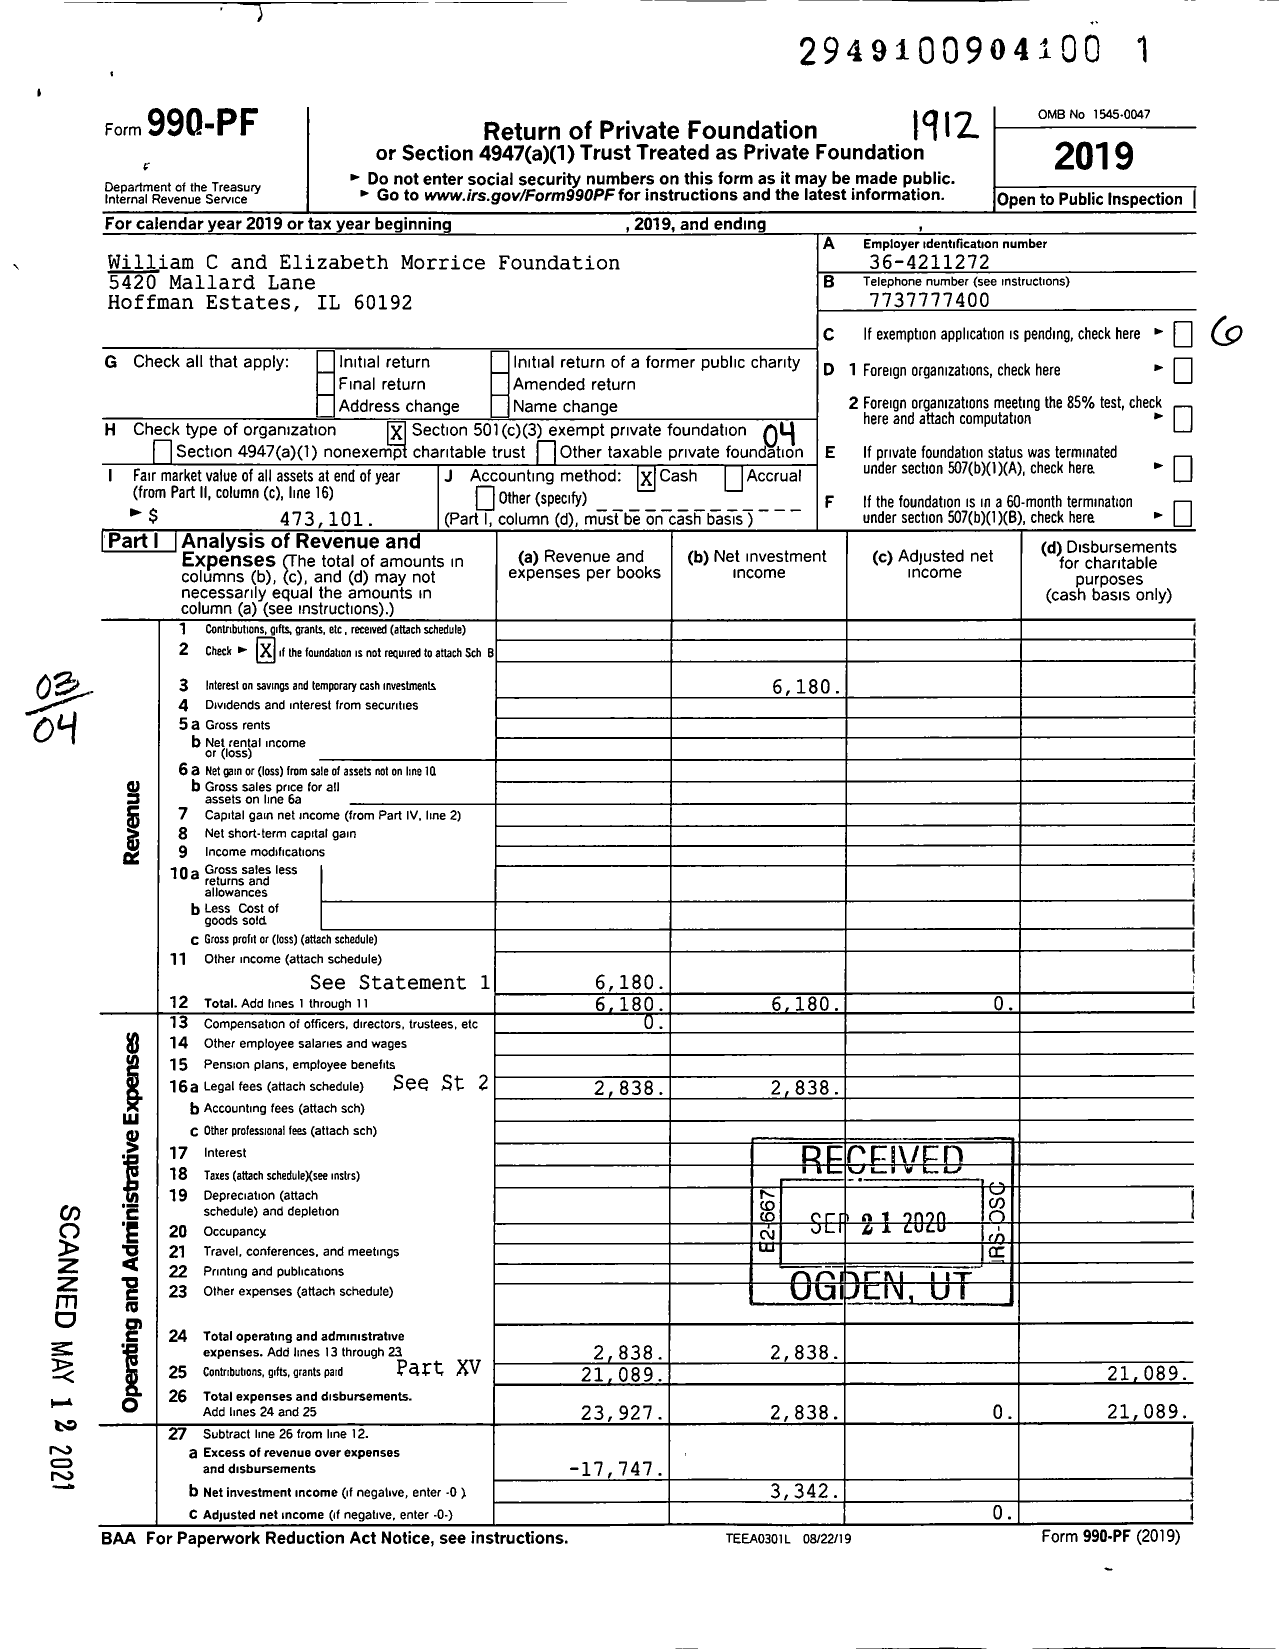 Image of first page of 2019 Form 990PF for William C and Elizabeth Morrice Foundation